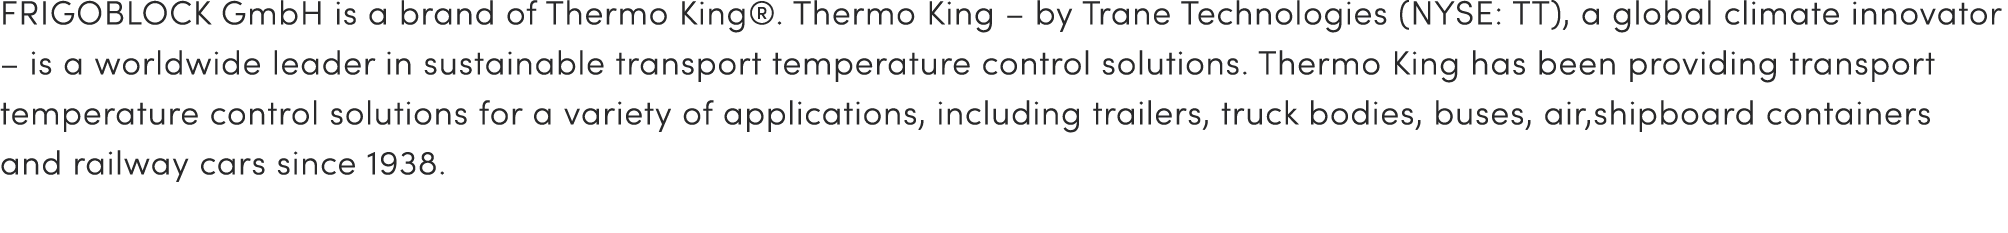 FRIGOBLOCK GmbH is a brand of Thermo King®. Thermo King – by Trane Technologies (NYSE: TT), a global climate innovato...